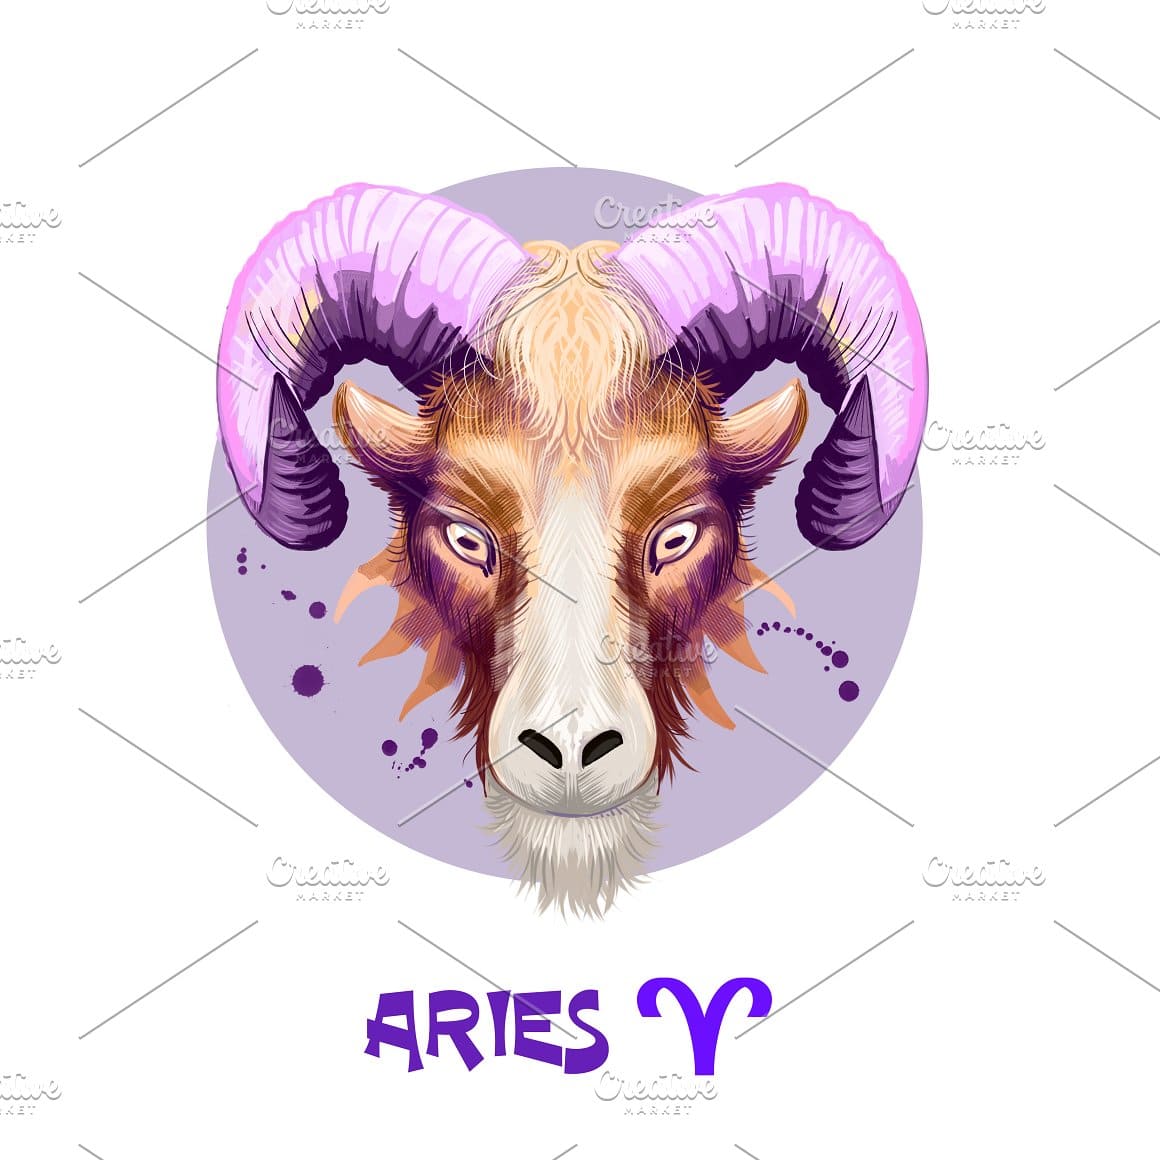 Huge purple horns are a symbol of Aries.